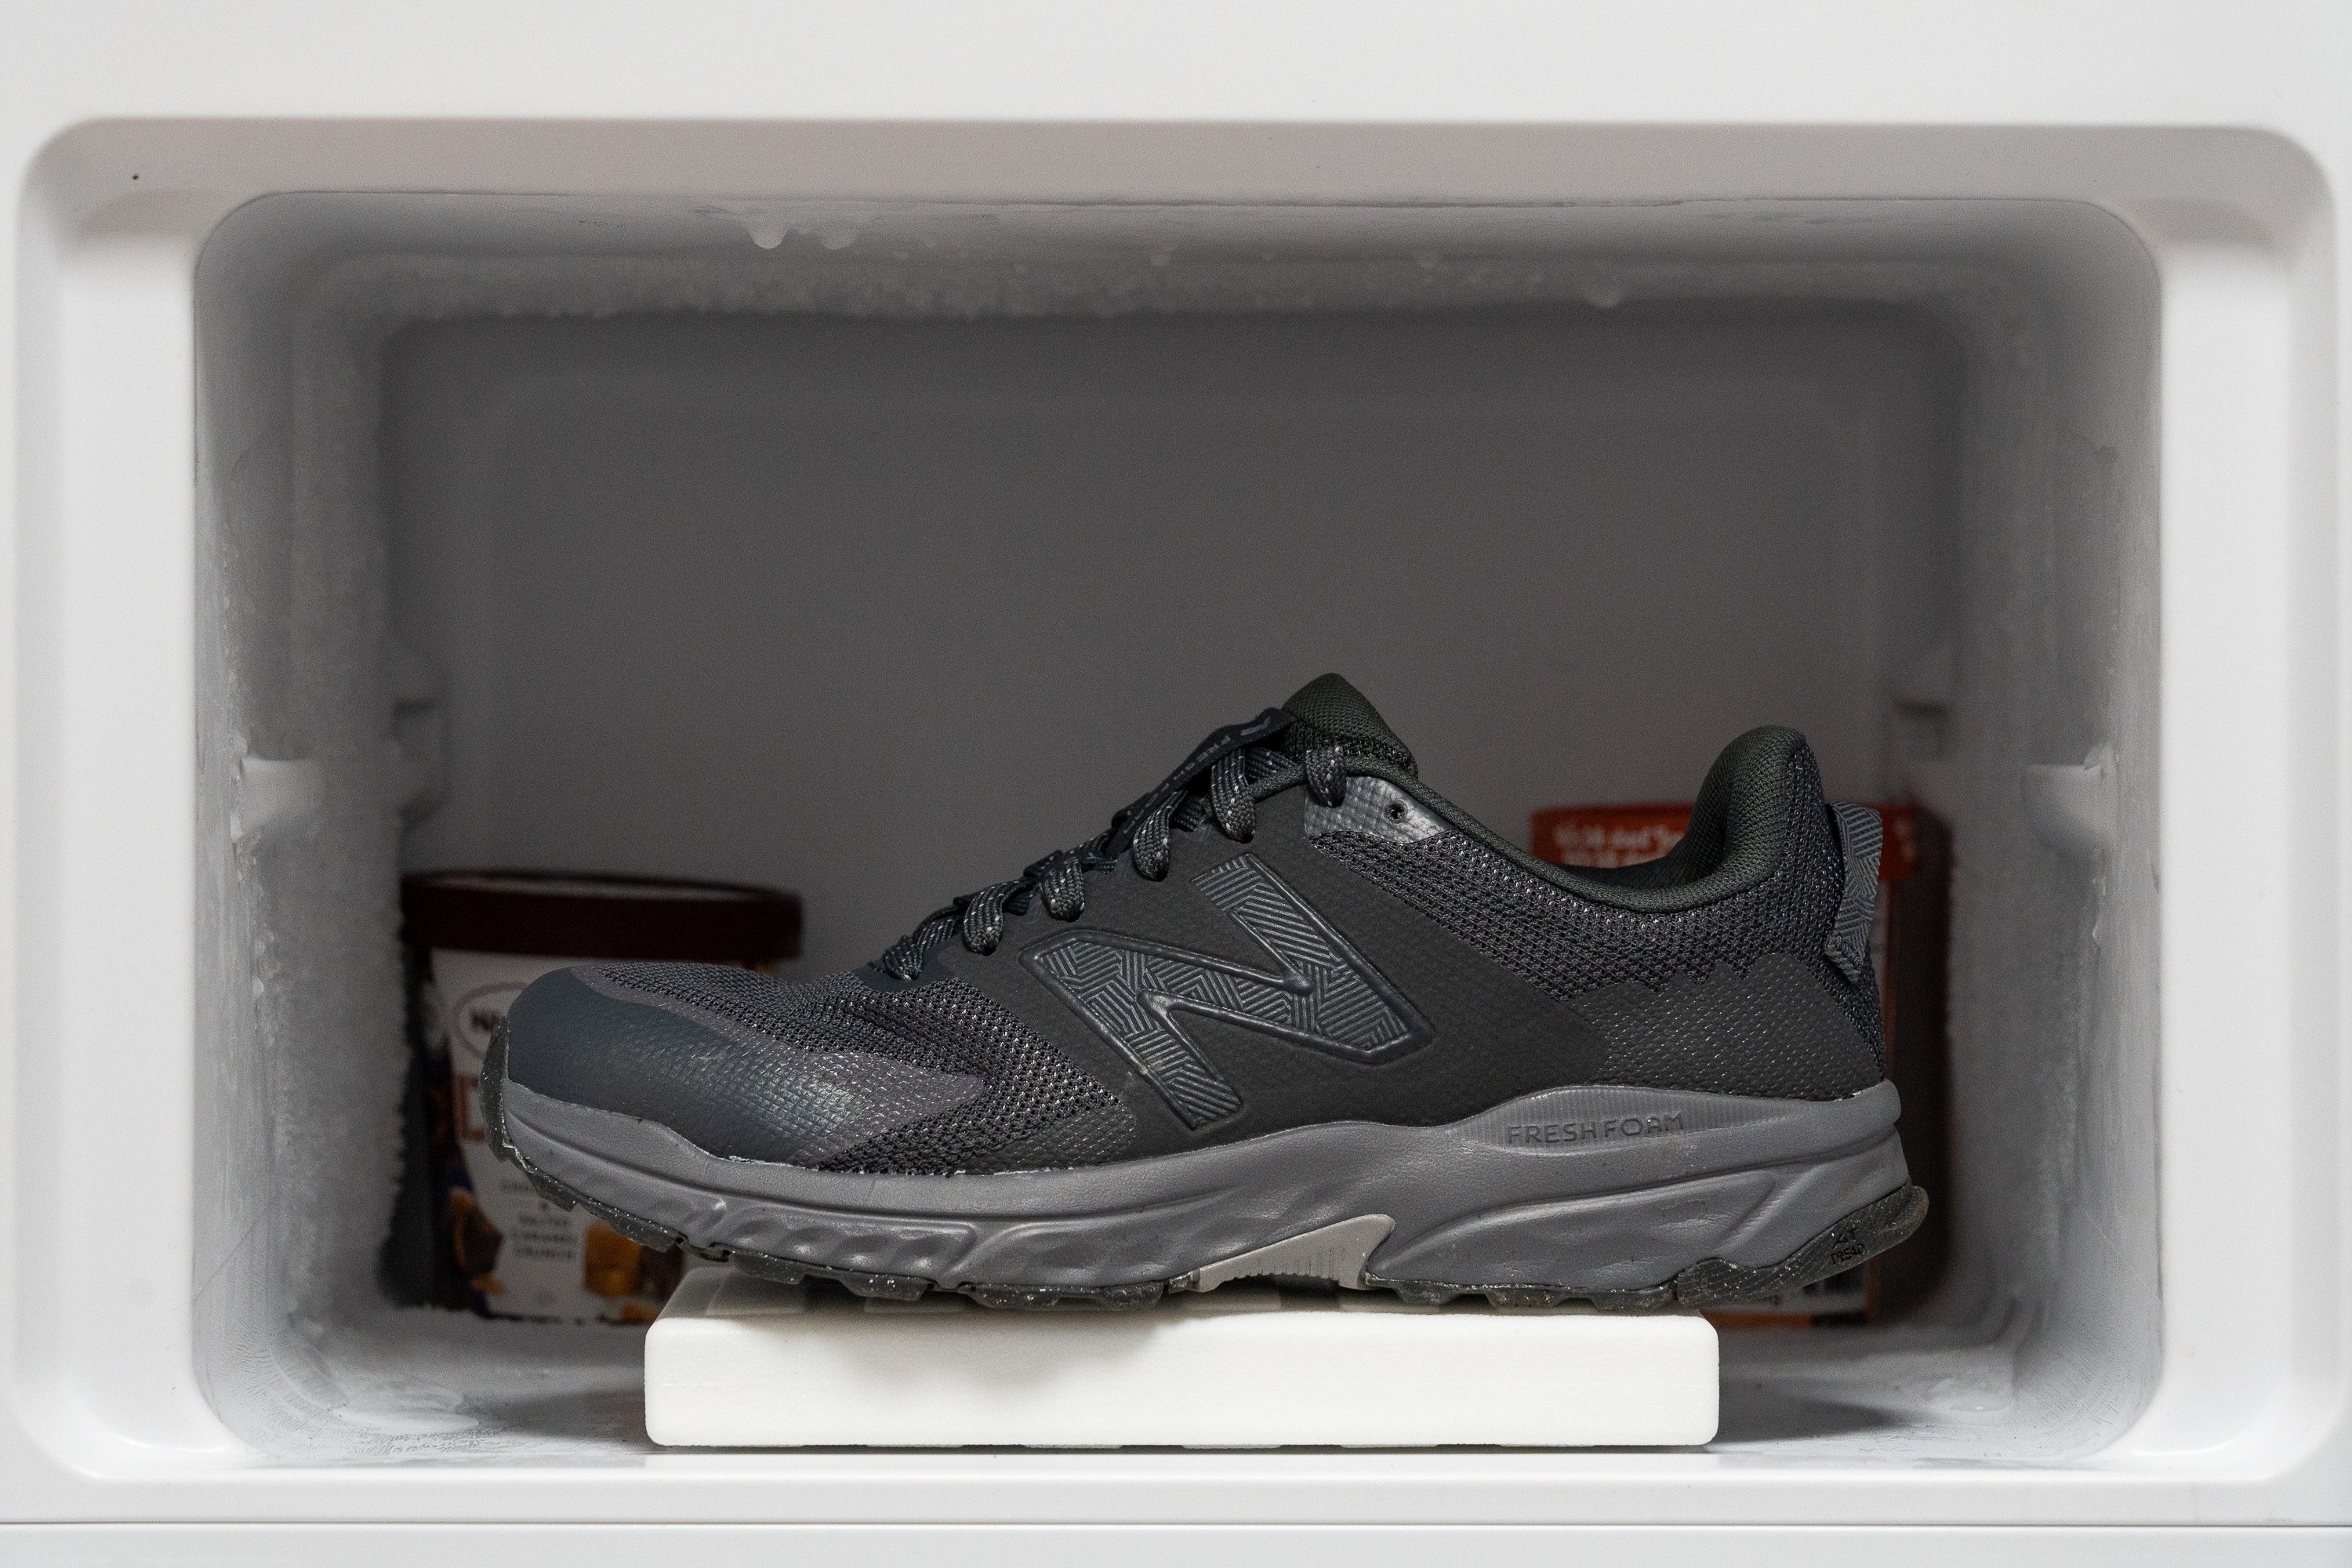 New Balance 510 v6 Difference in midsole softness in cold